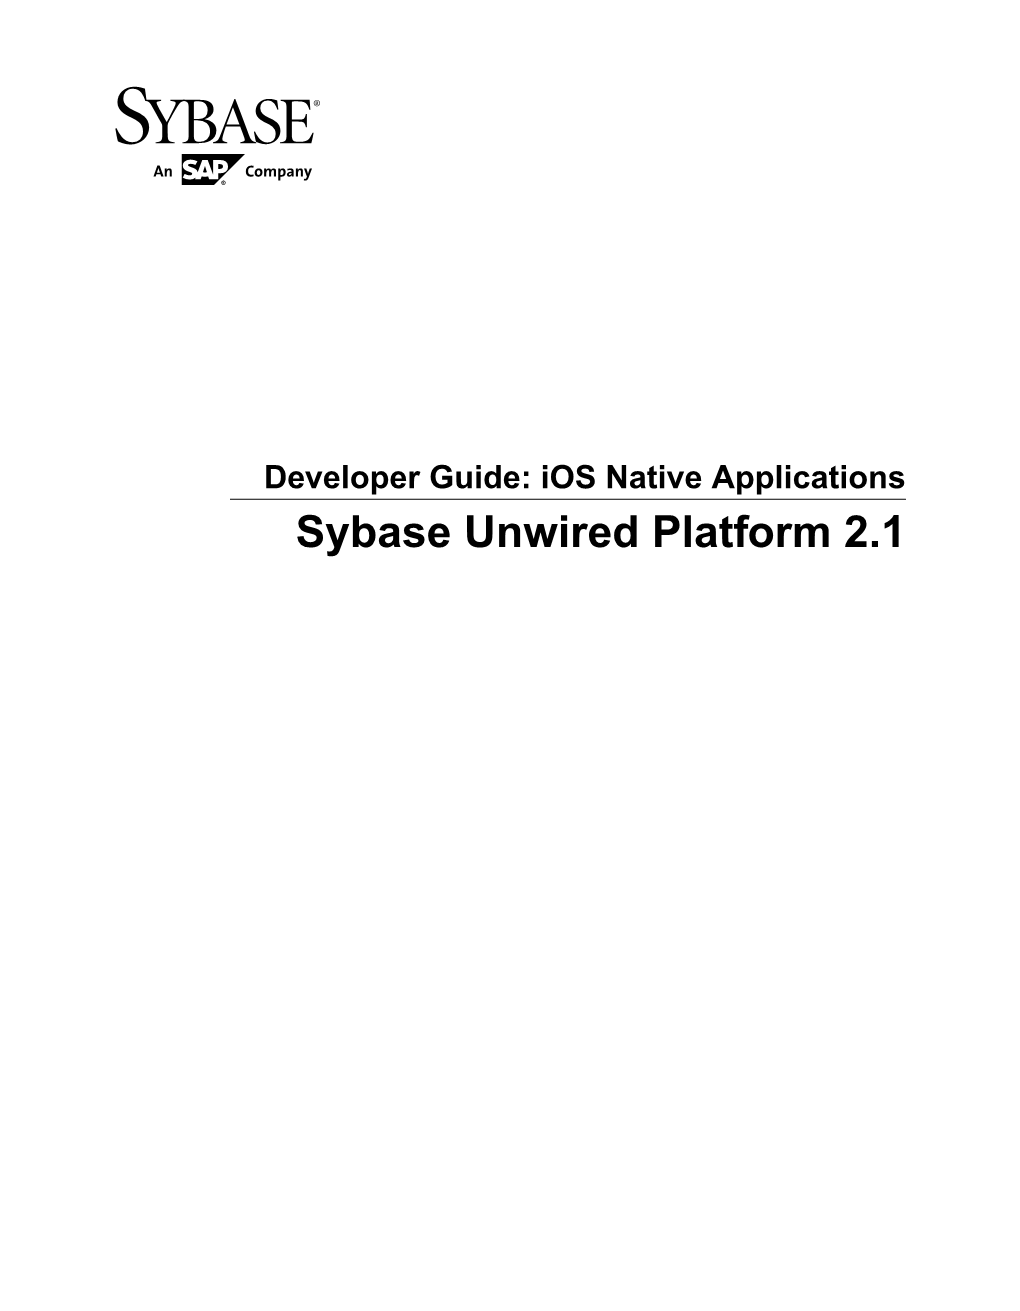 Developer Guide: Ios Native Applications Sybase Unwired Platform 2.1 DOCUMENT ID: DC01217-01-0210-03 LAST REVISED: July 2012 Copyright © 2012 by Sybase, Inc